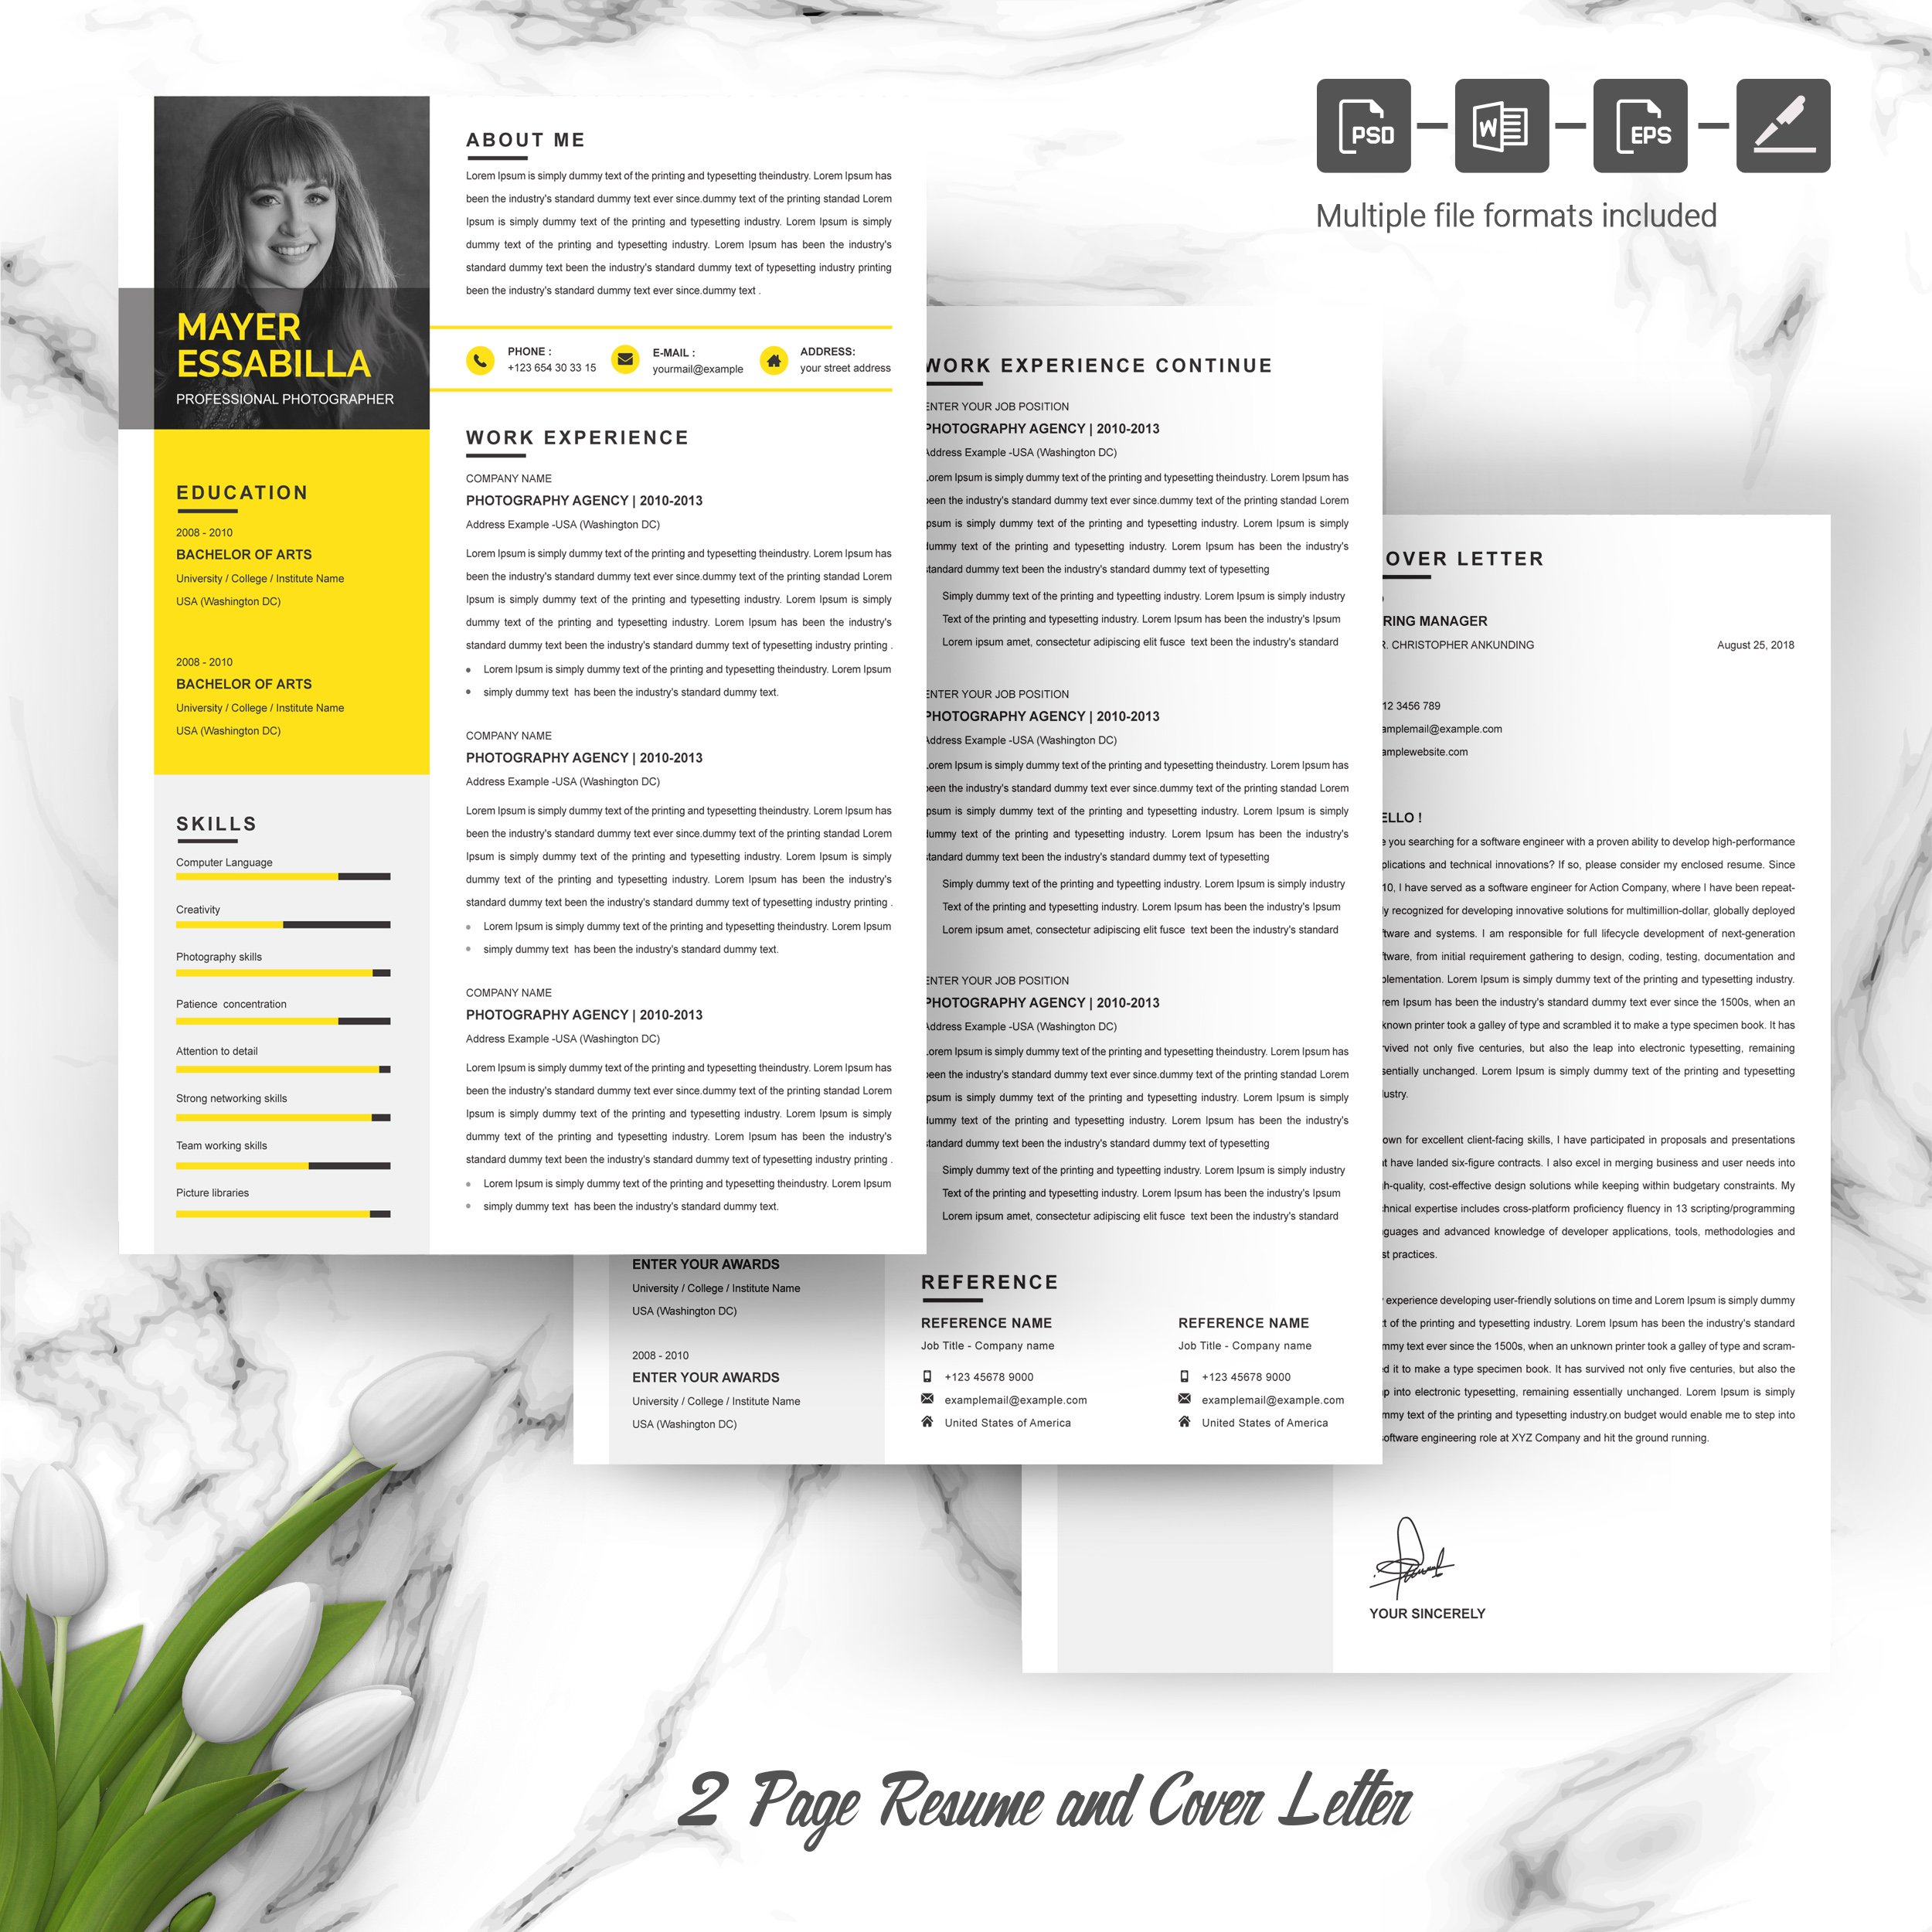 04 3 pages free resume design template 756